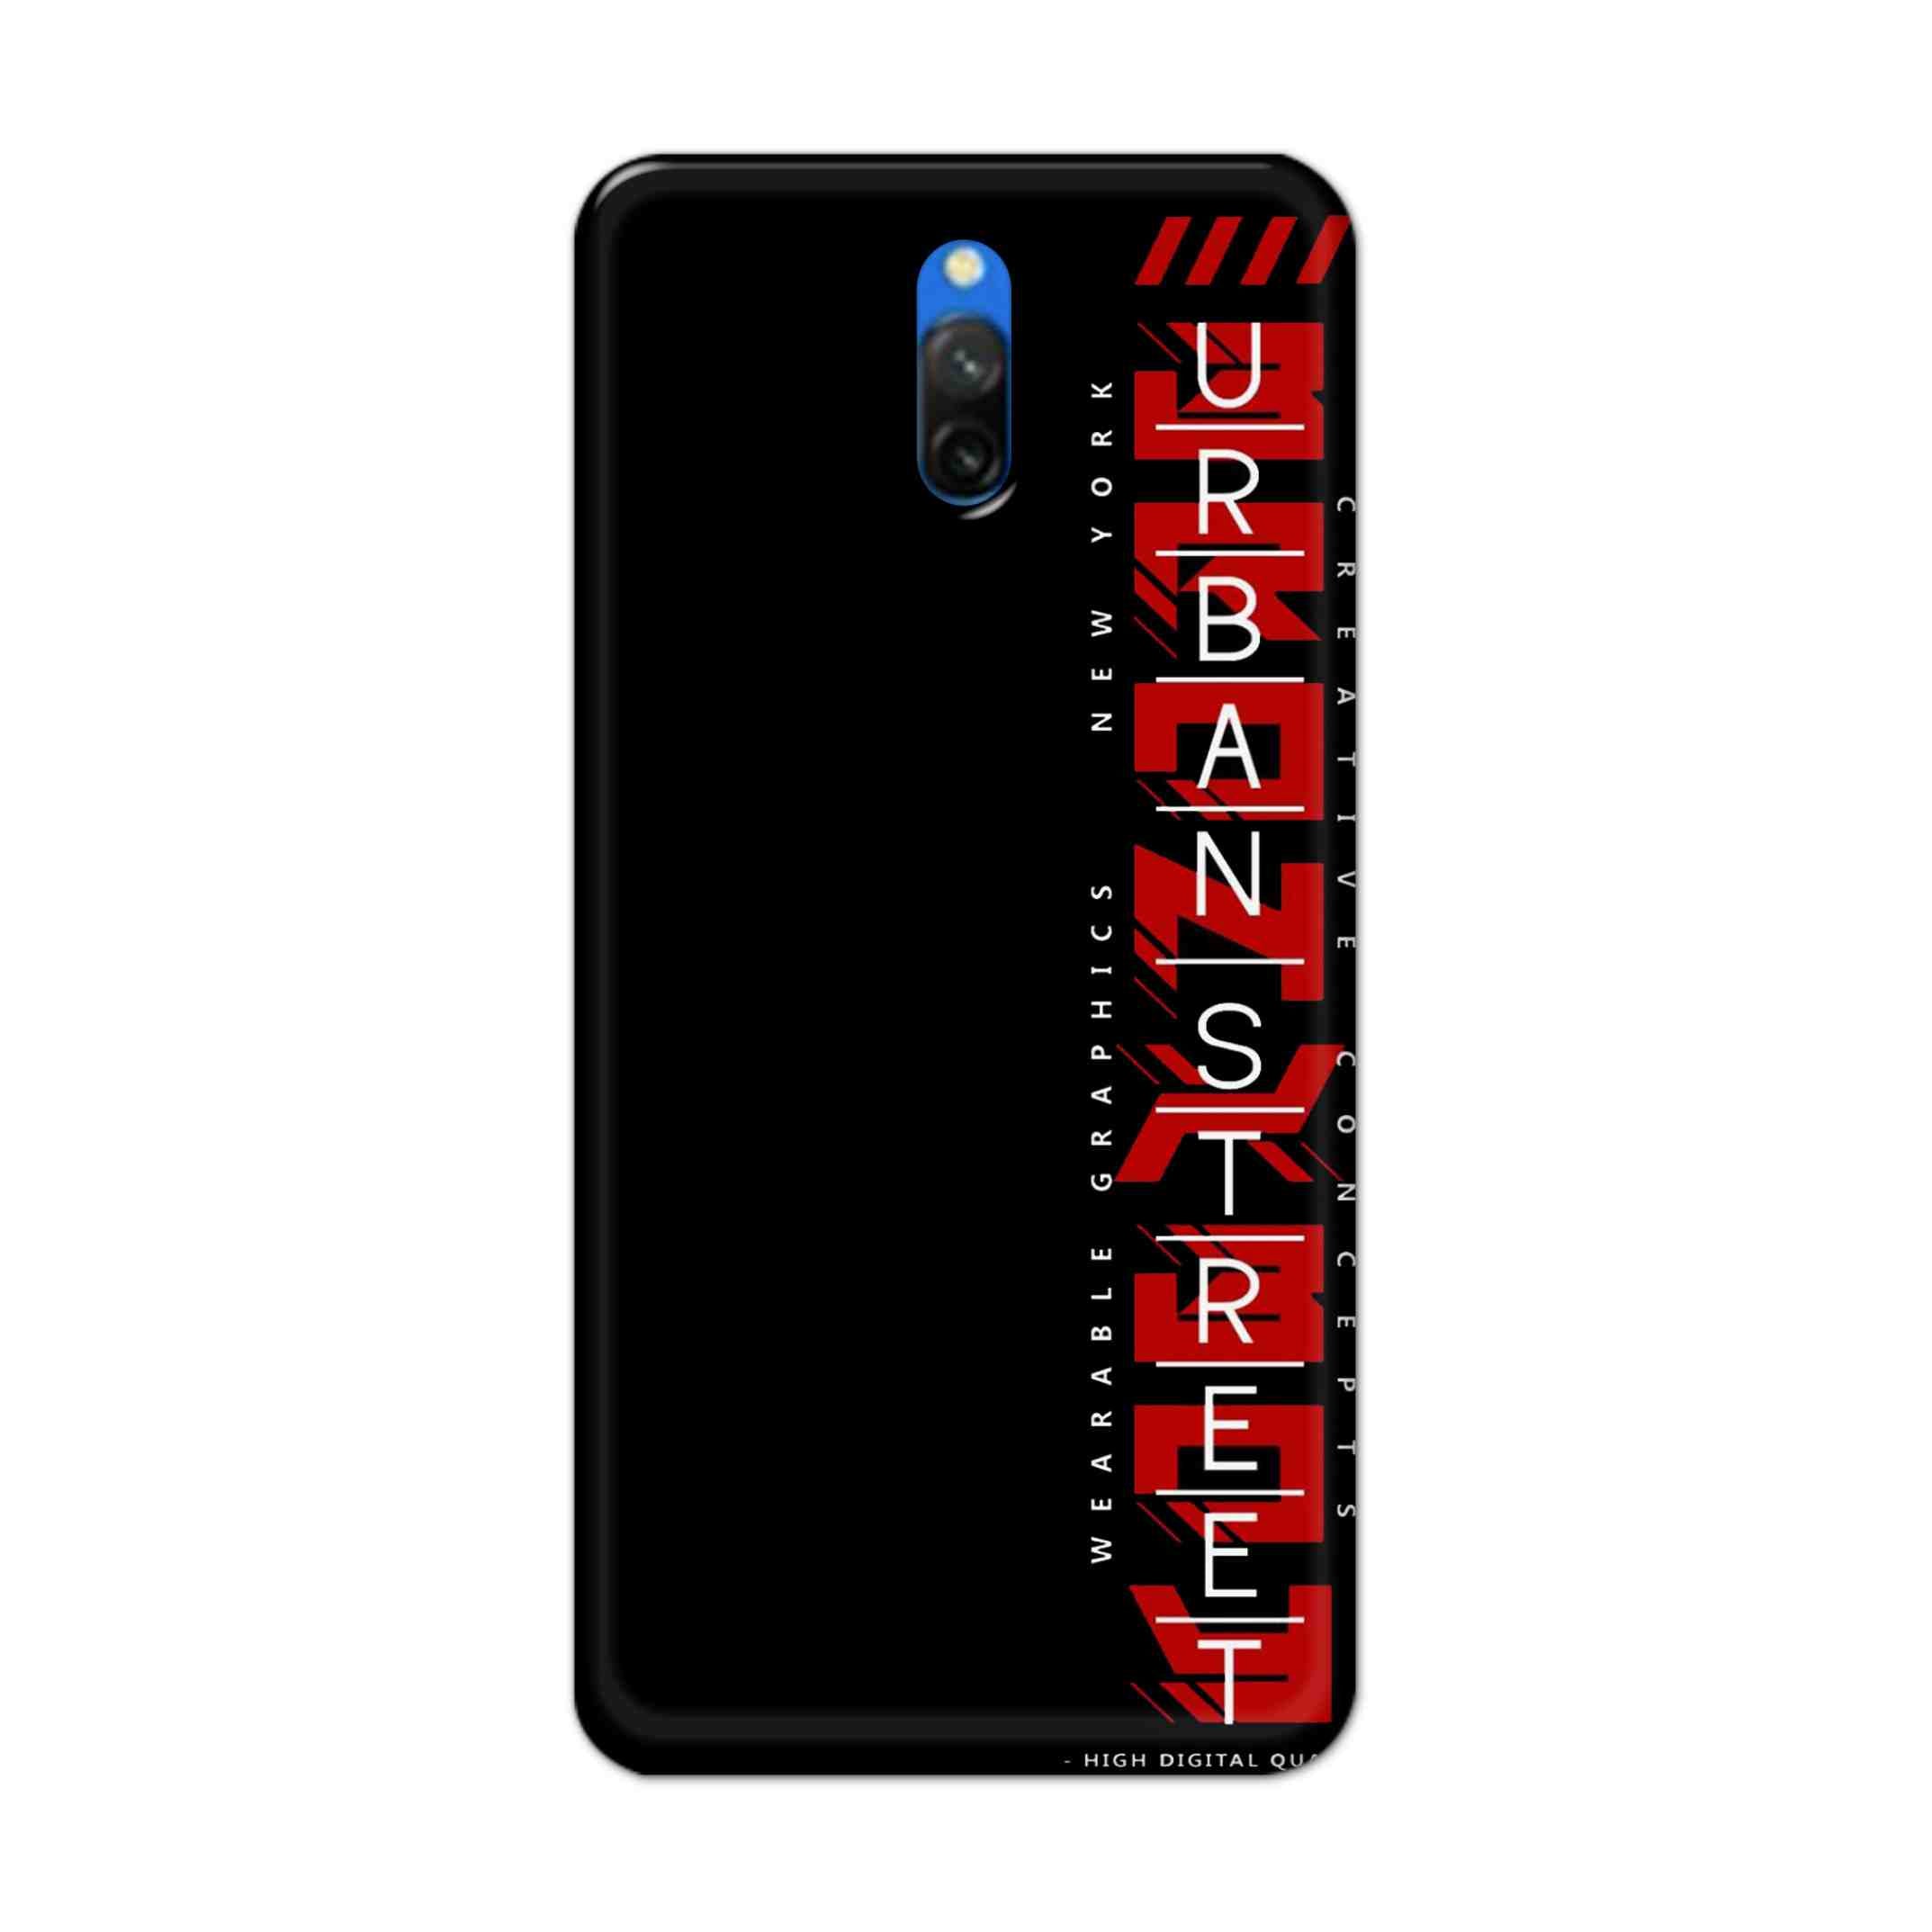 Buy Urban Street Hard Back Mobile Phone Case/Cover For Redmi 8A Dual Online